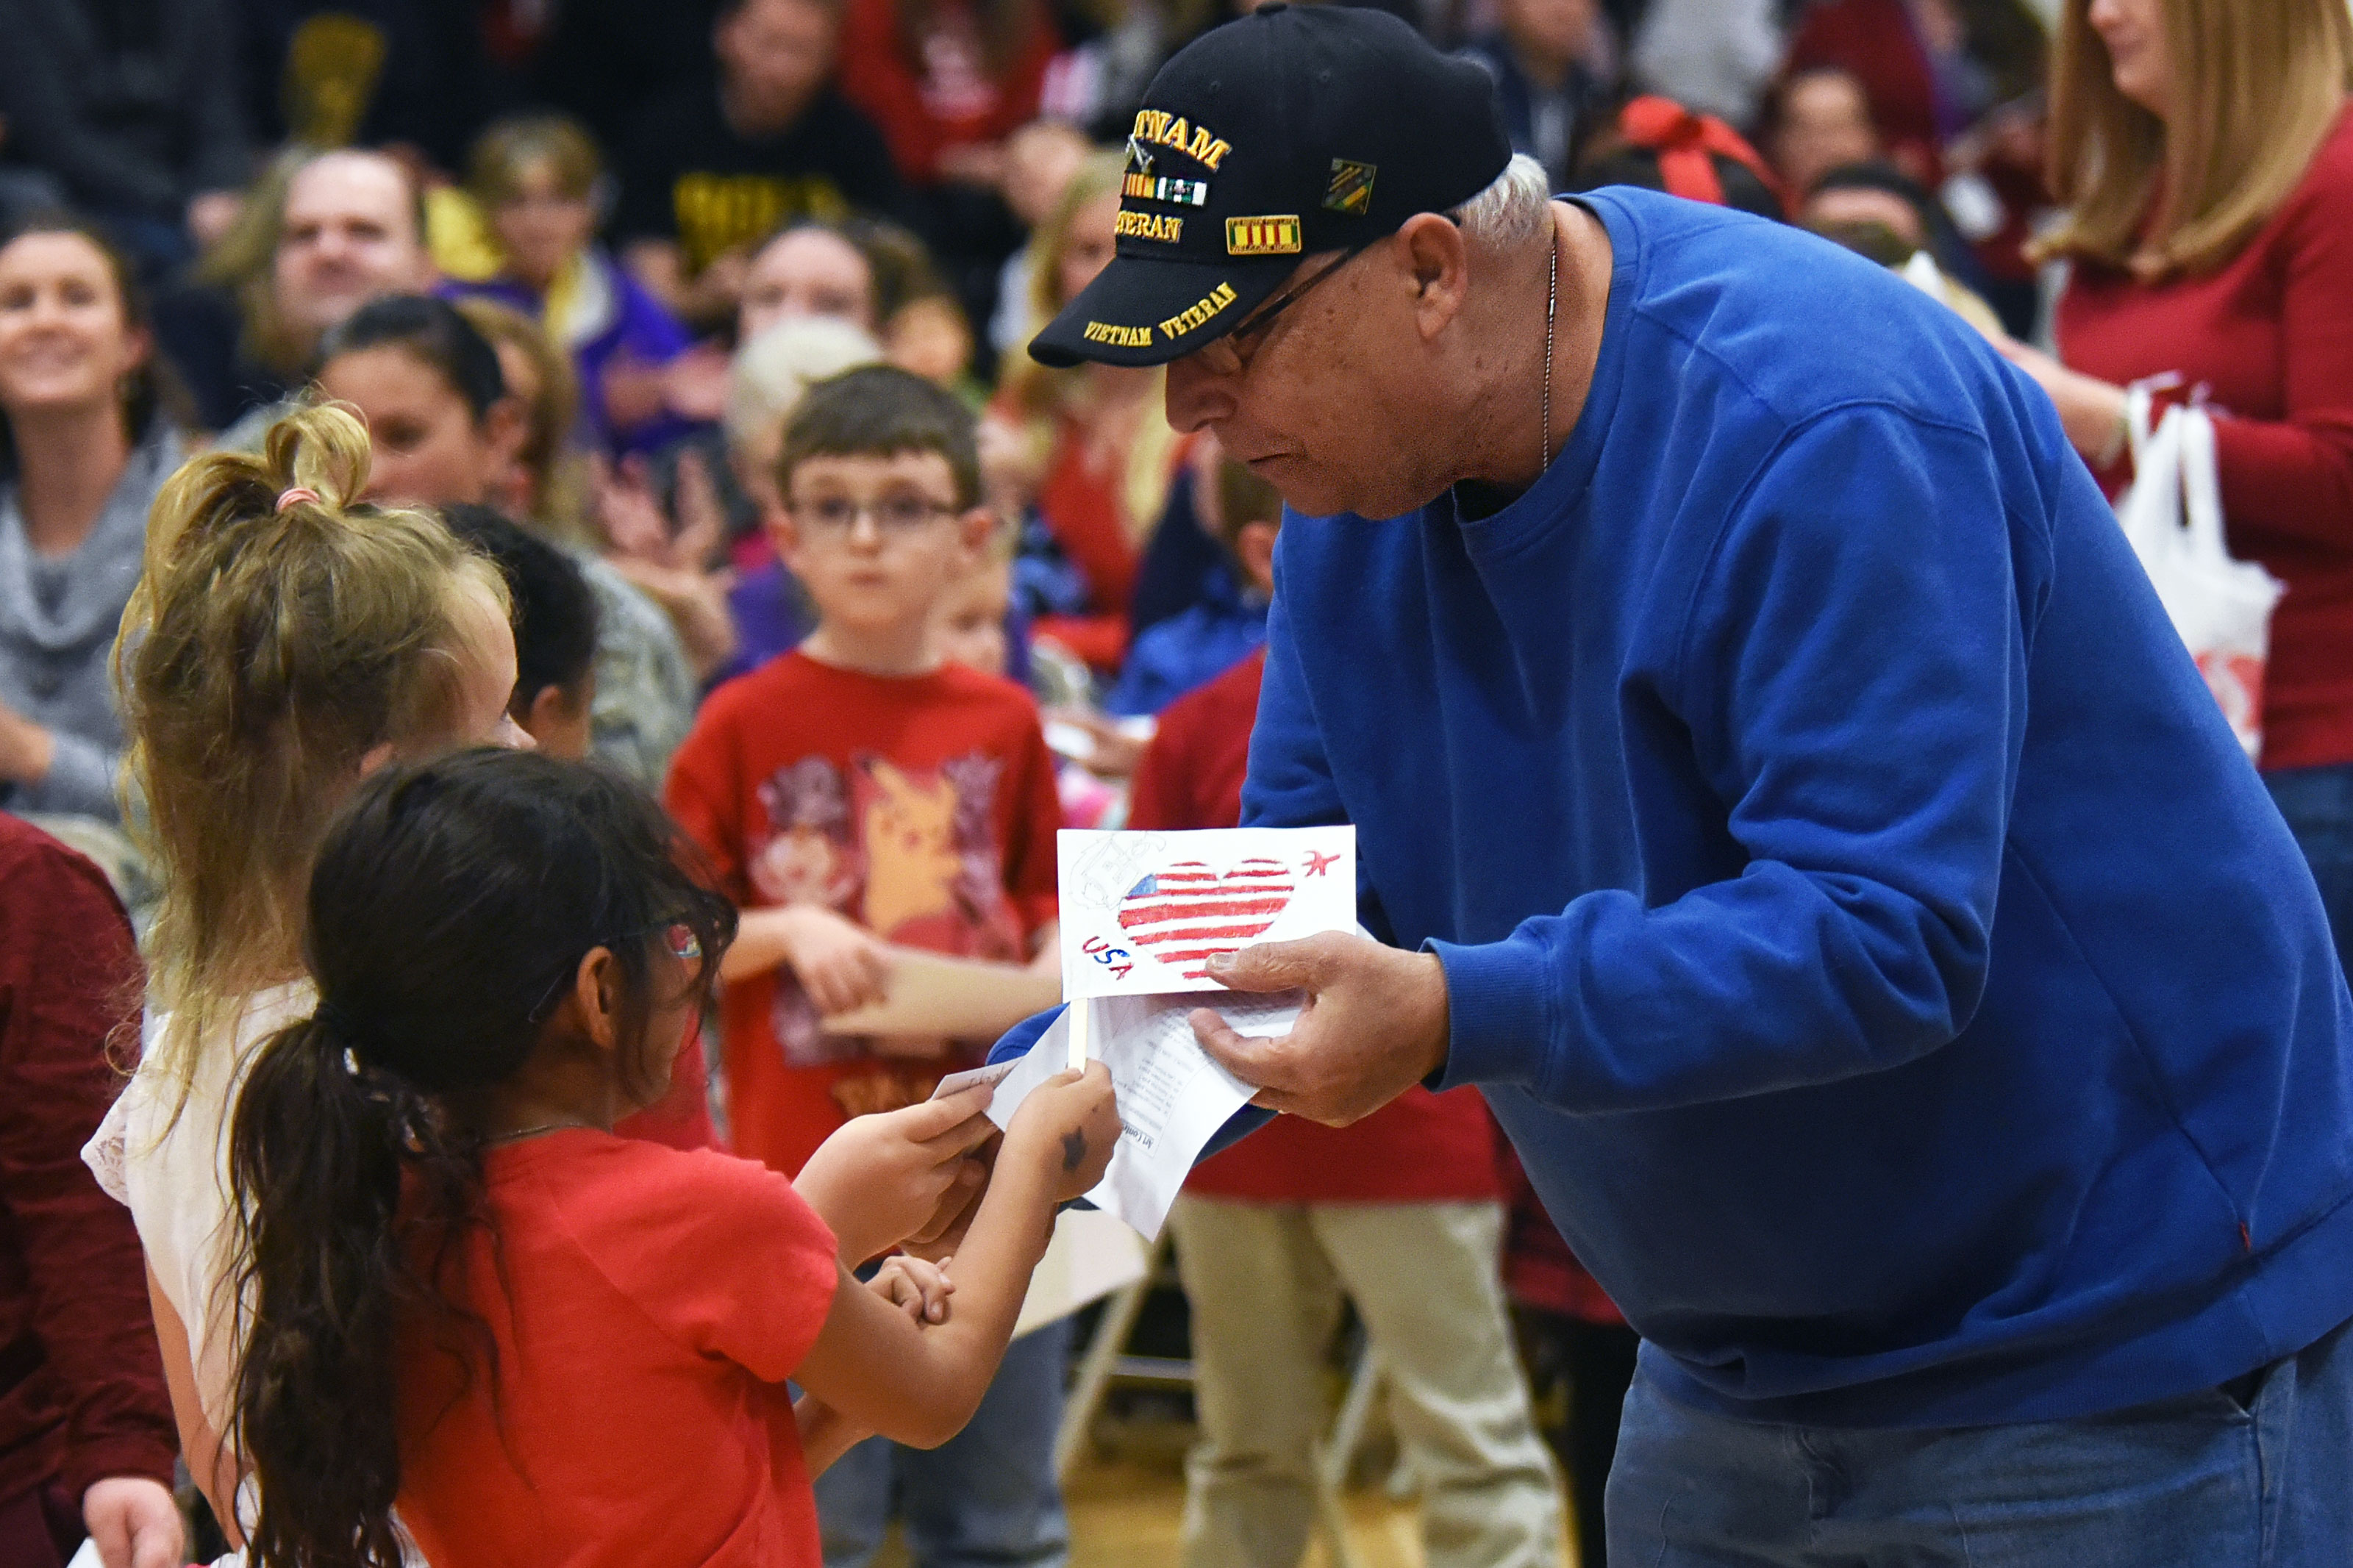 Ellicott students give thank you letters and hand-made flags to a Vietnam veteran during the Ellicott School District Veteran’s Day ceremony at Ellicott, Colorado. The Ellicott community event honored veterans, both past and present. (U.S. Air Force/William Tracy)